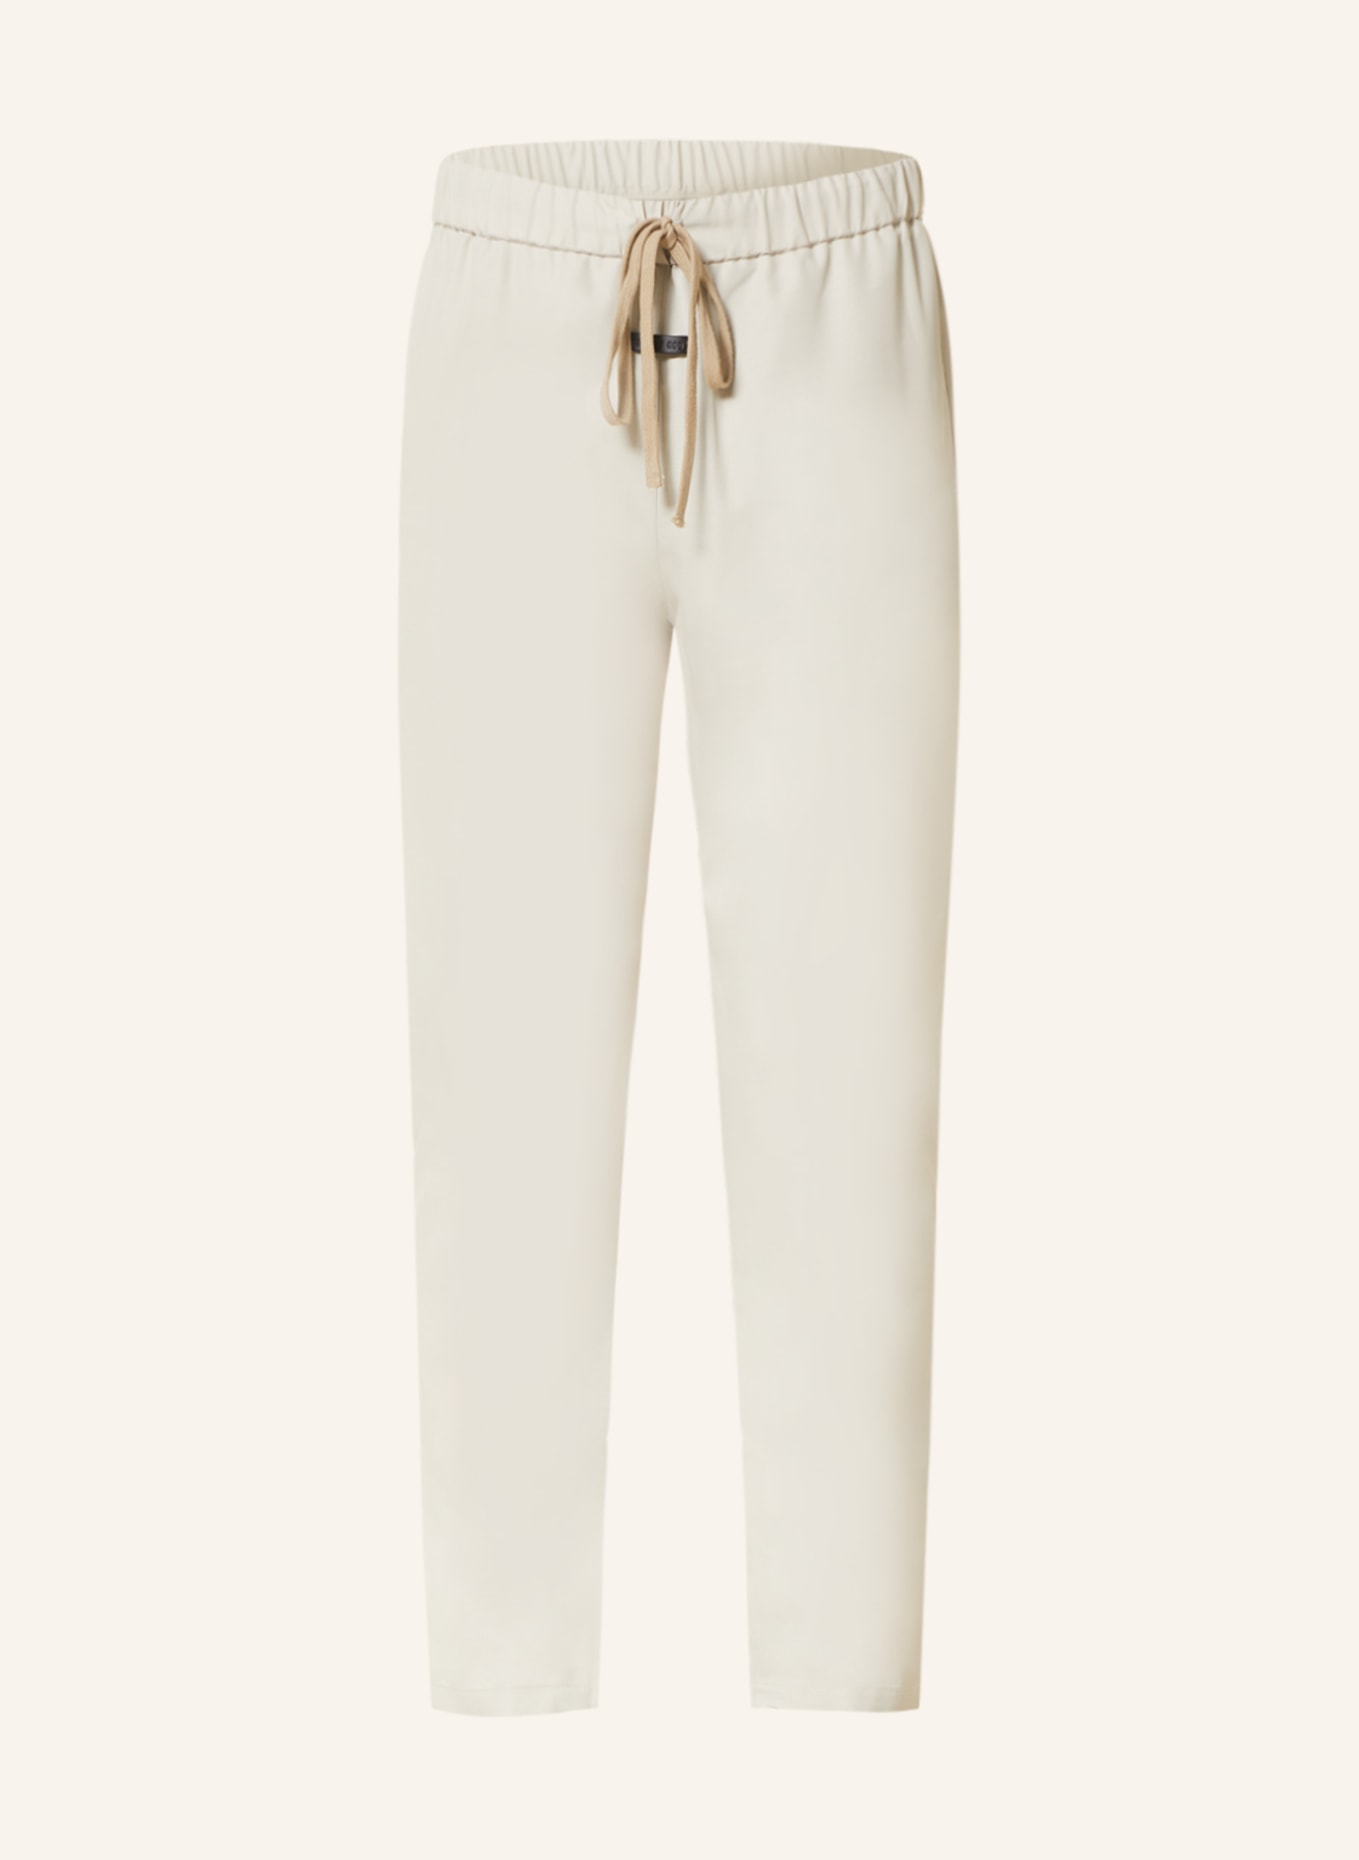 FEAR OF GOD Pants in jogger style slim fit, Color: LIGHT GRAY (Image 1)